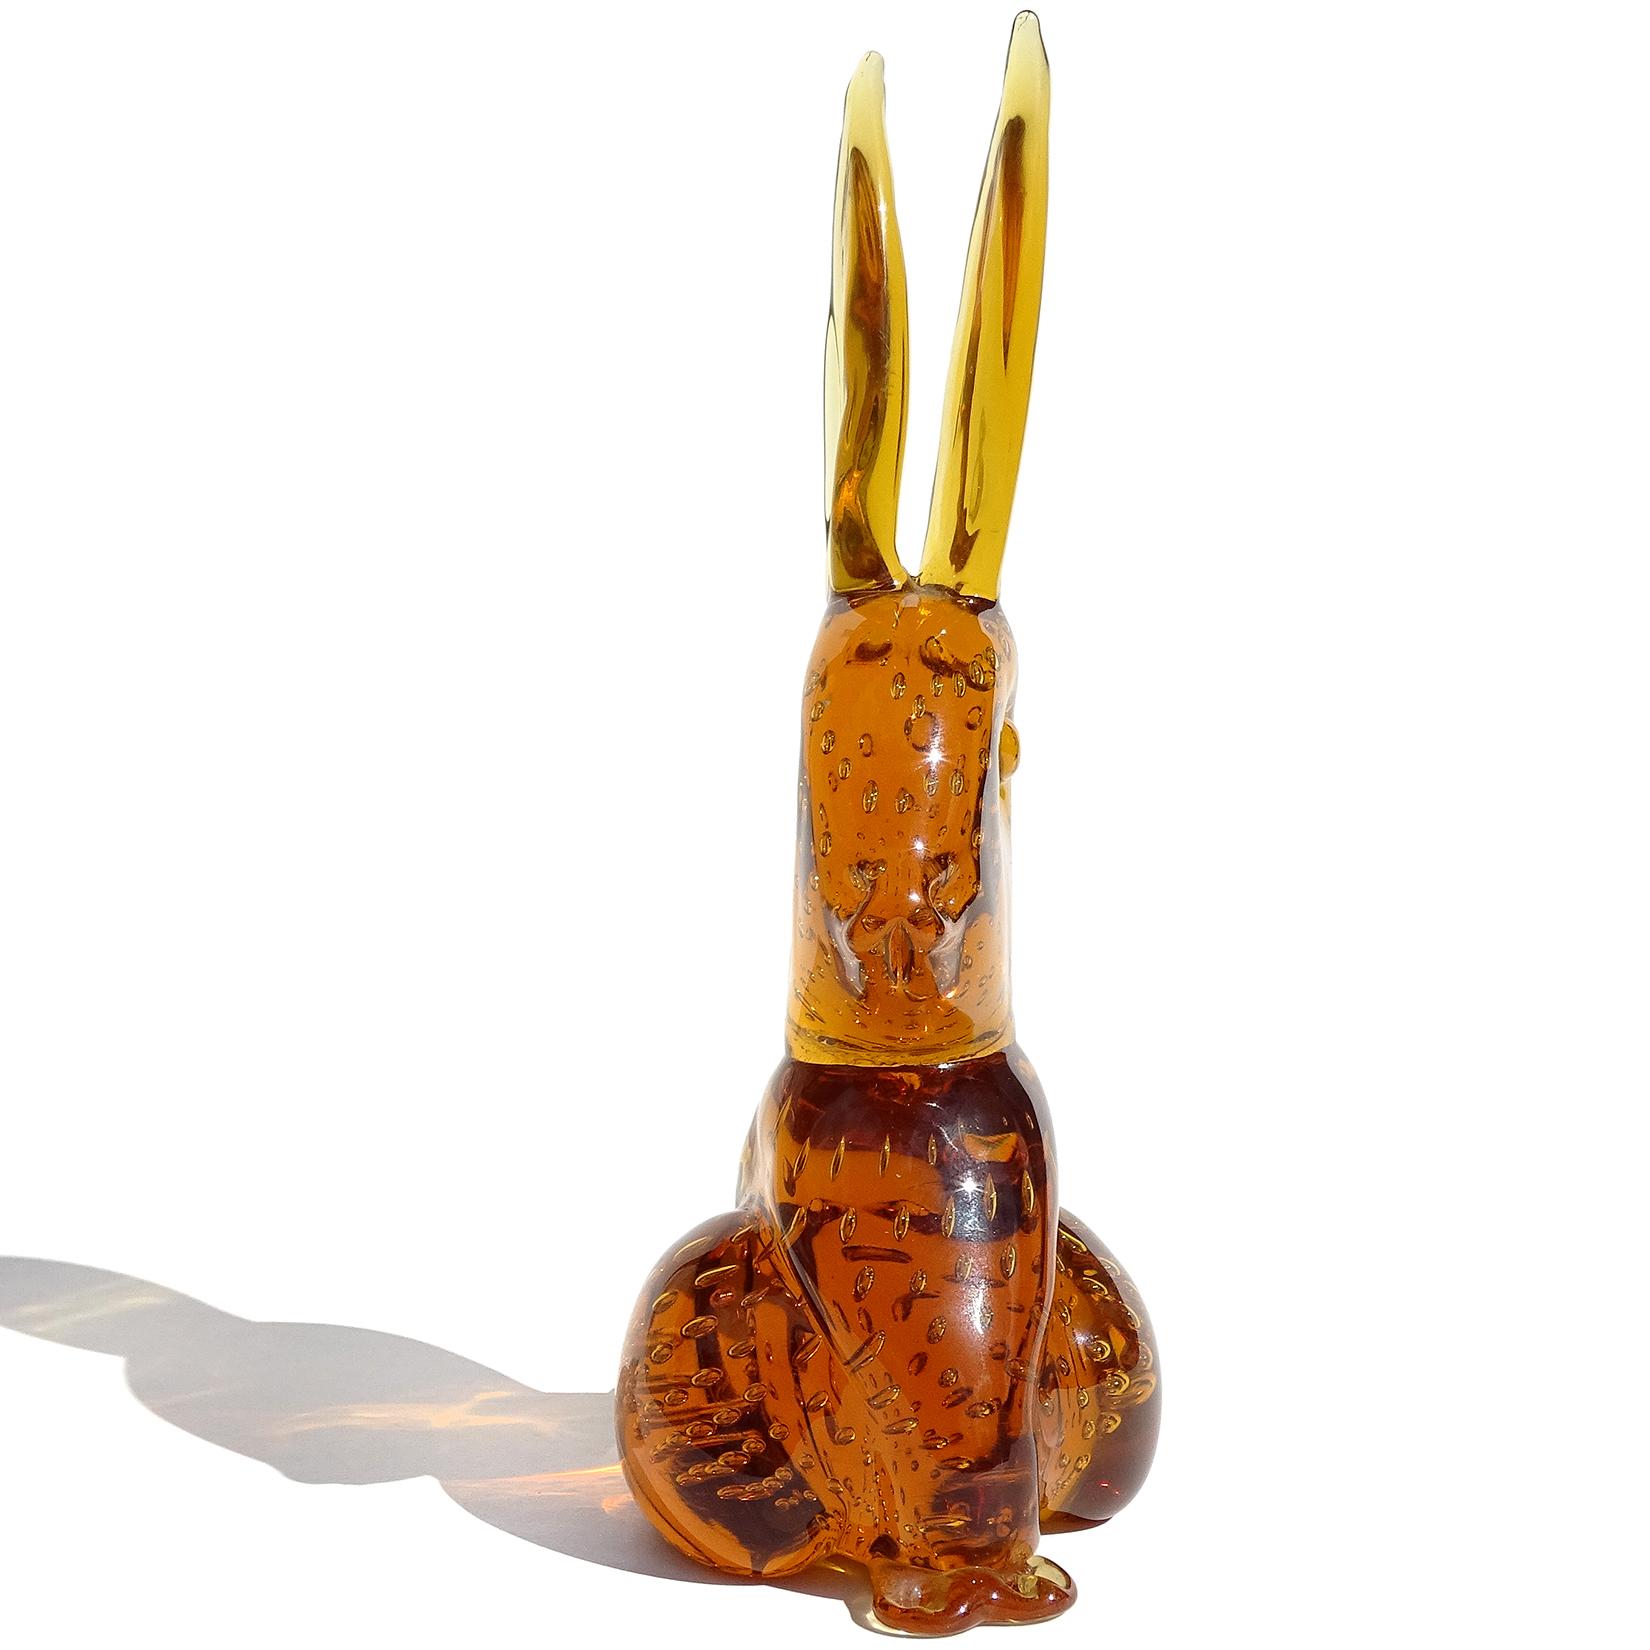 Cute vintage handblown golden amber with controlled bubbles, Italian art glass bunny rabbit sculpture / figure. It does not have a label, but I have owned previous ones with a 